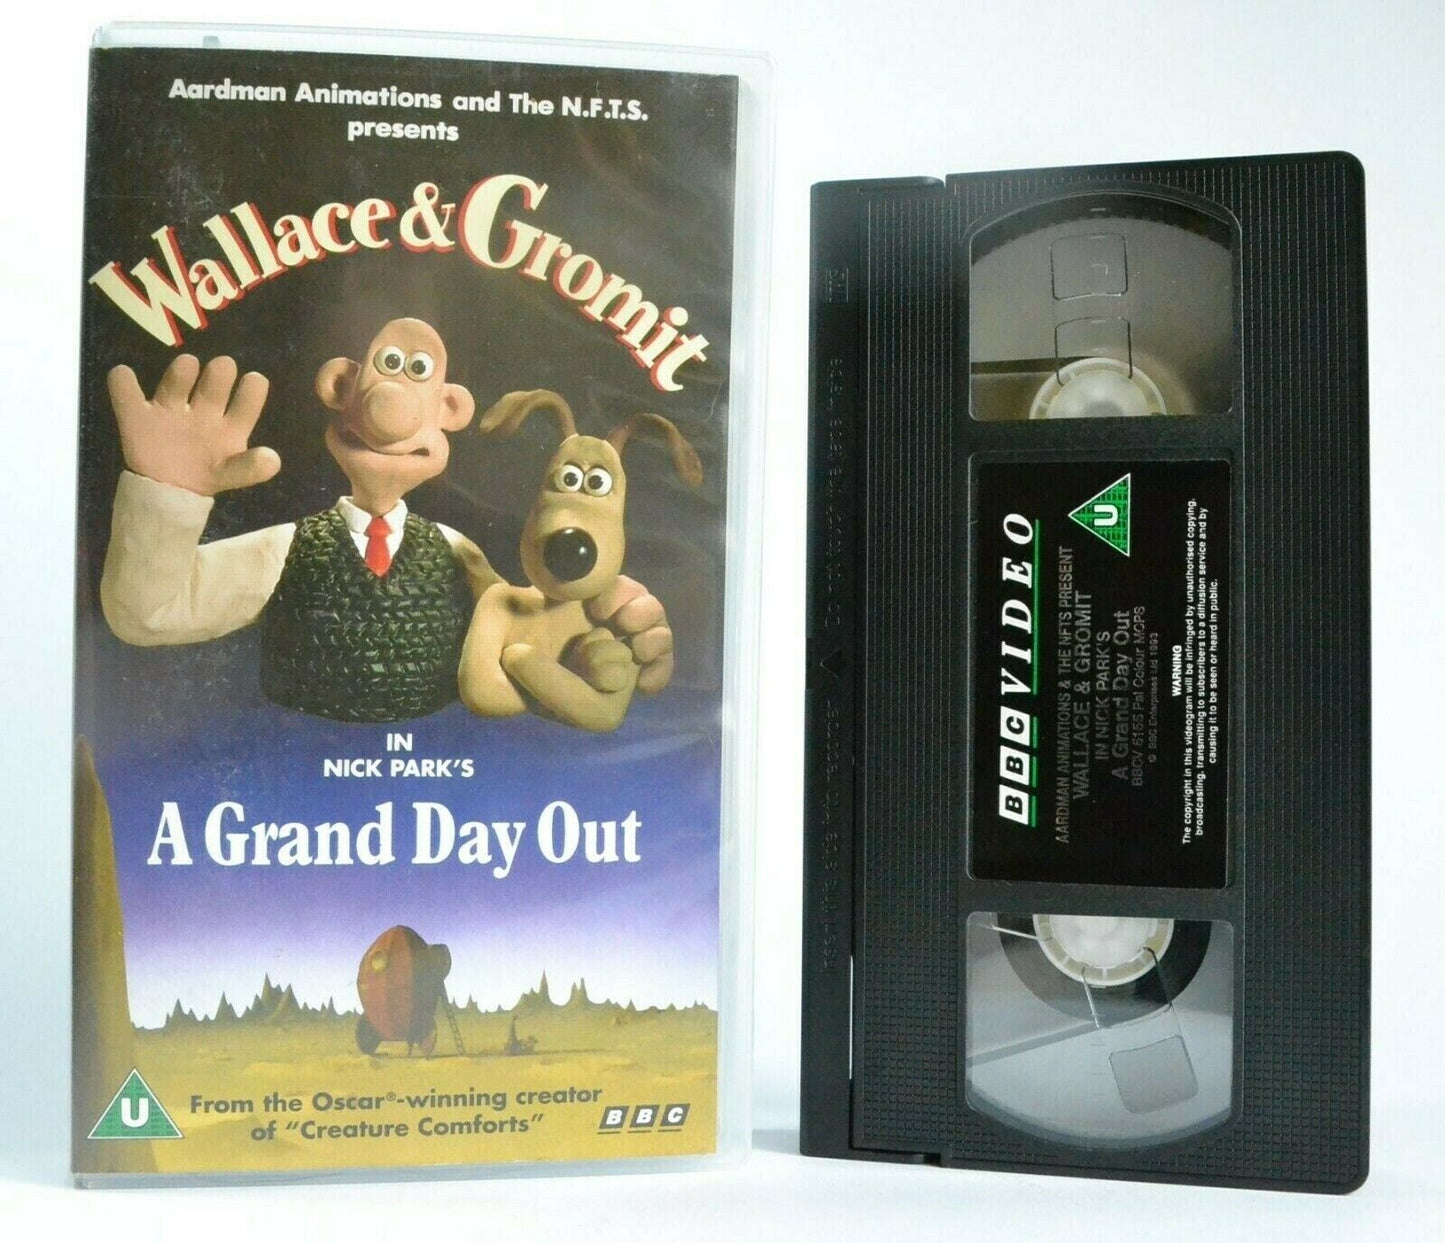 Wallace And Gromit: A Grand Day Out (1993) - By Nick Park - Animated - Pal VHS-